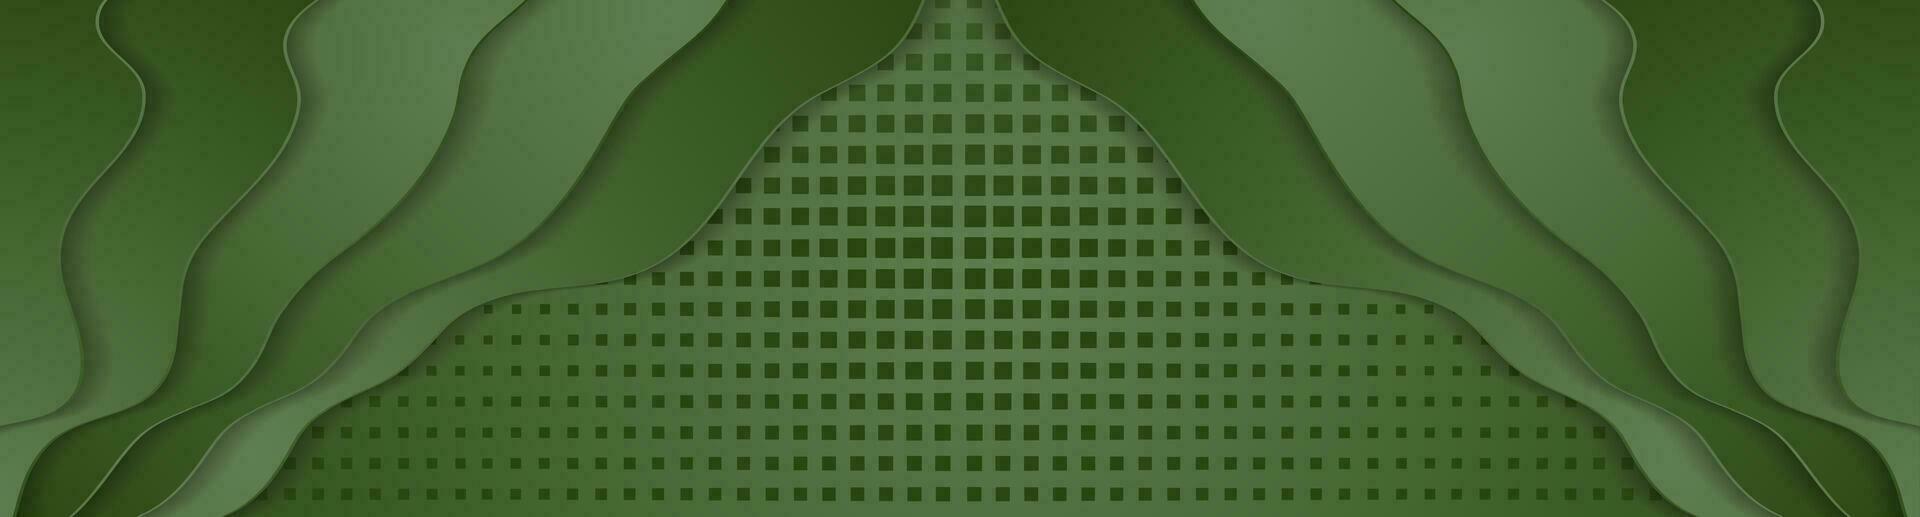 Green wavy background with squares texture vector